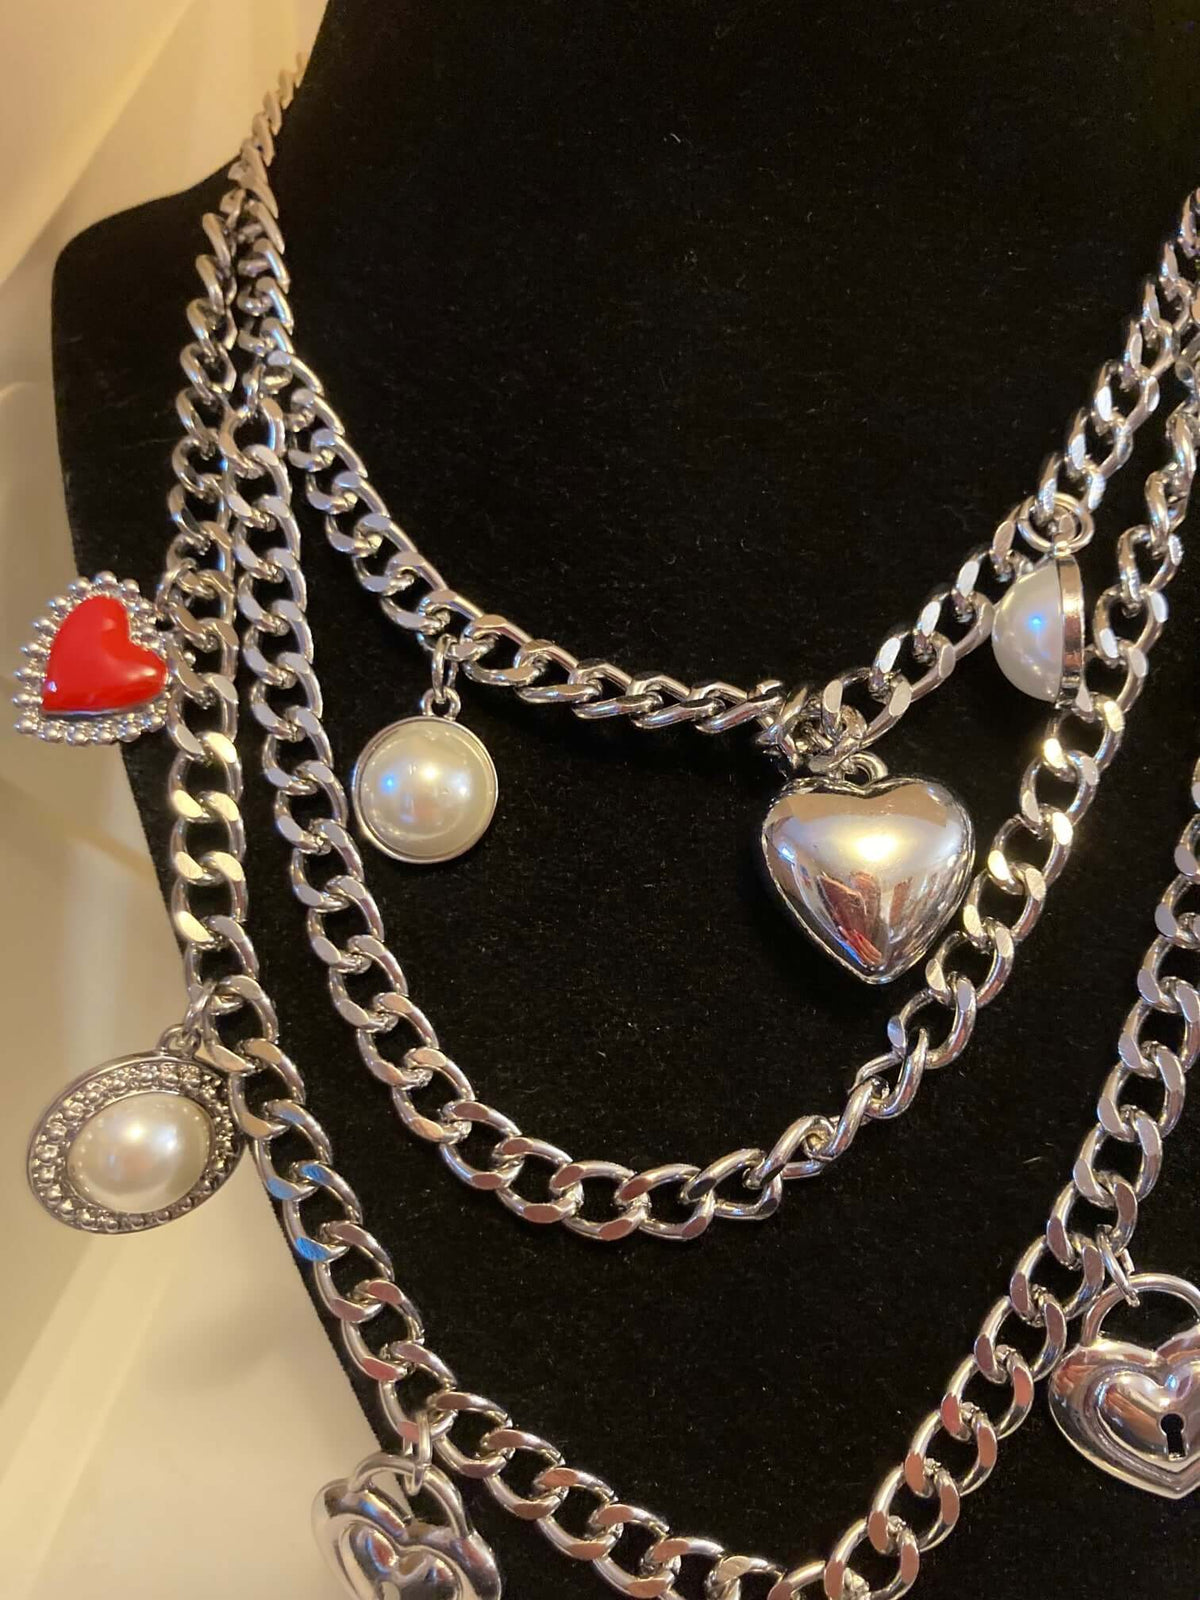 Layered Heart Necklace Set